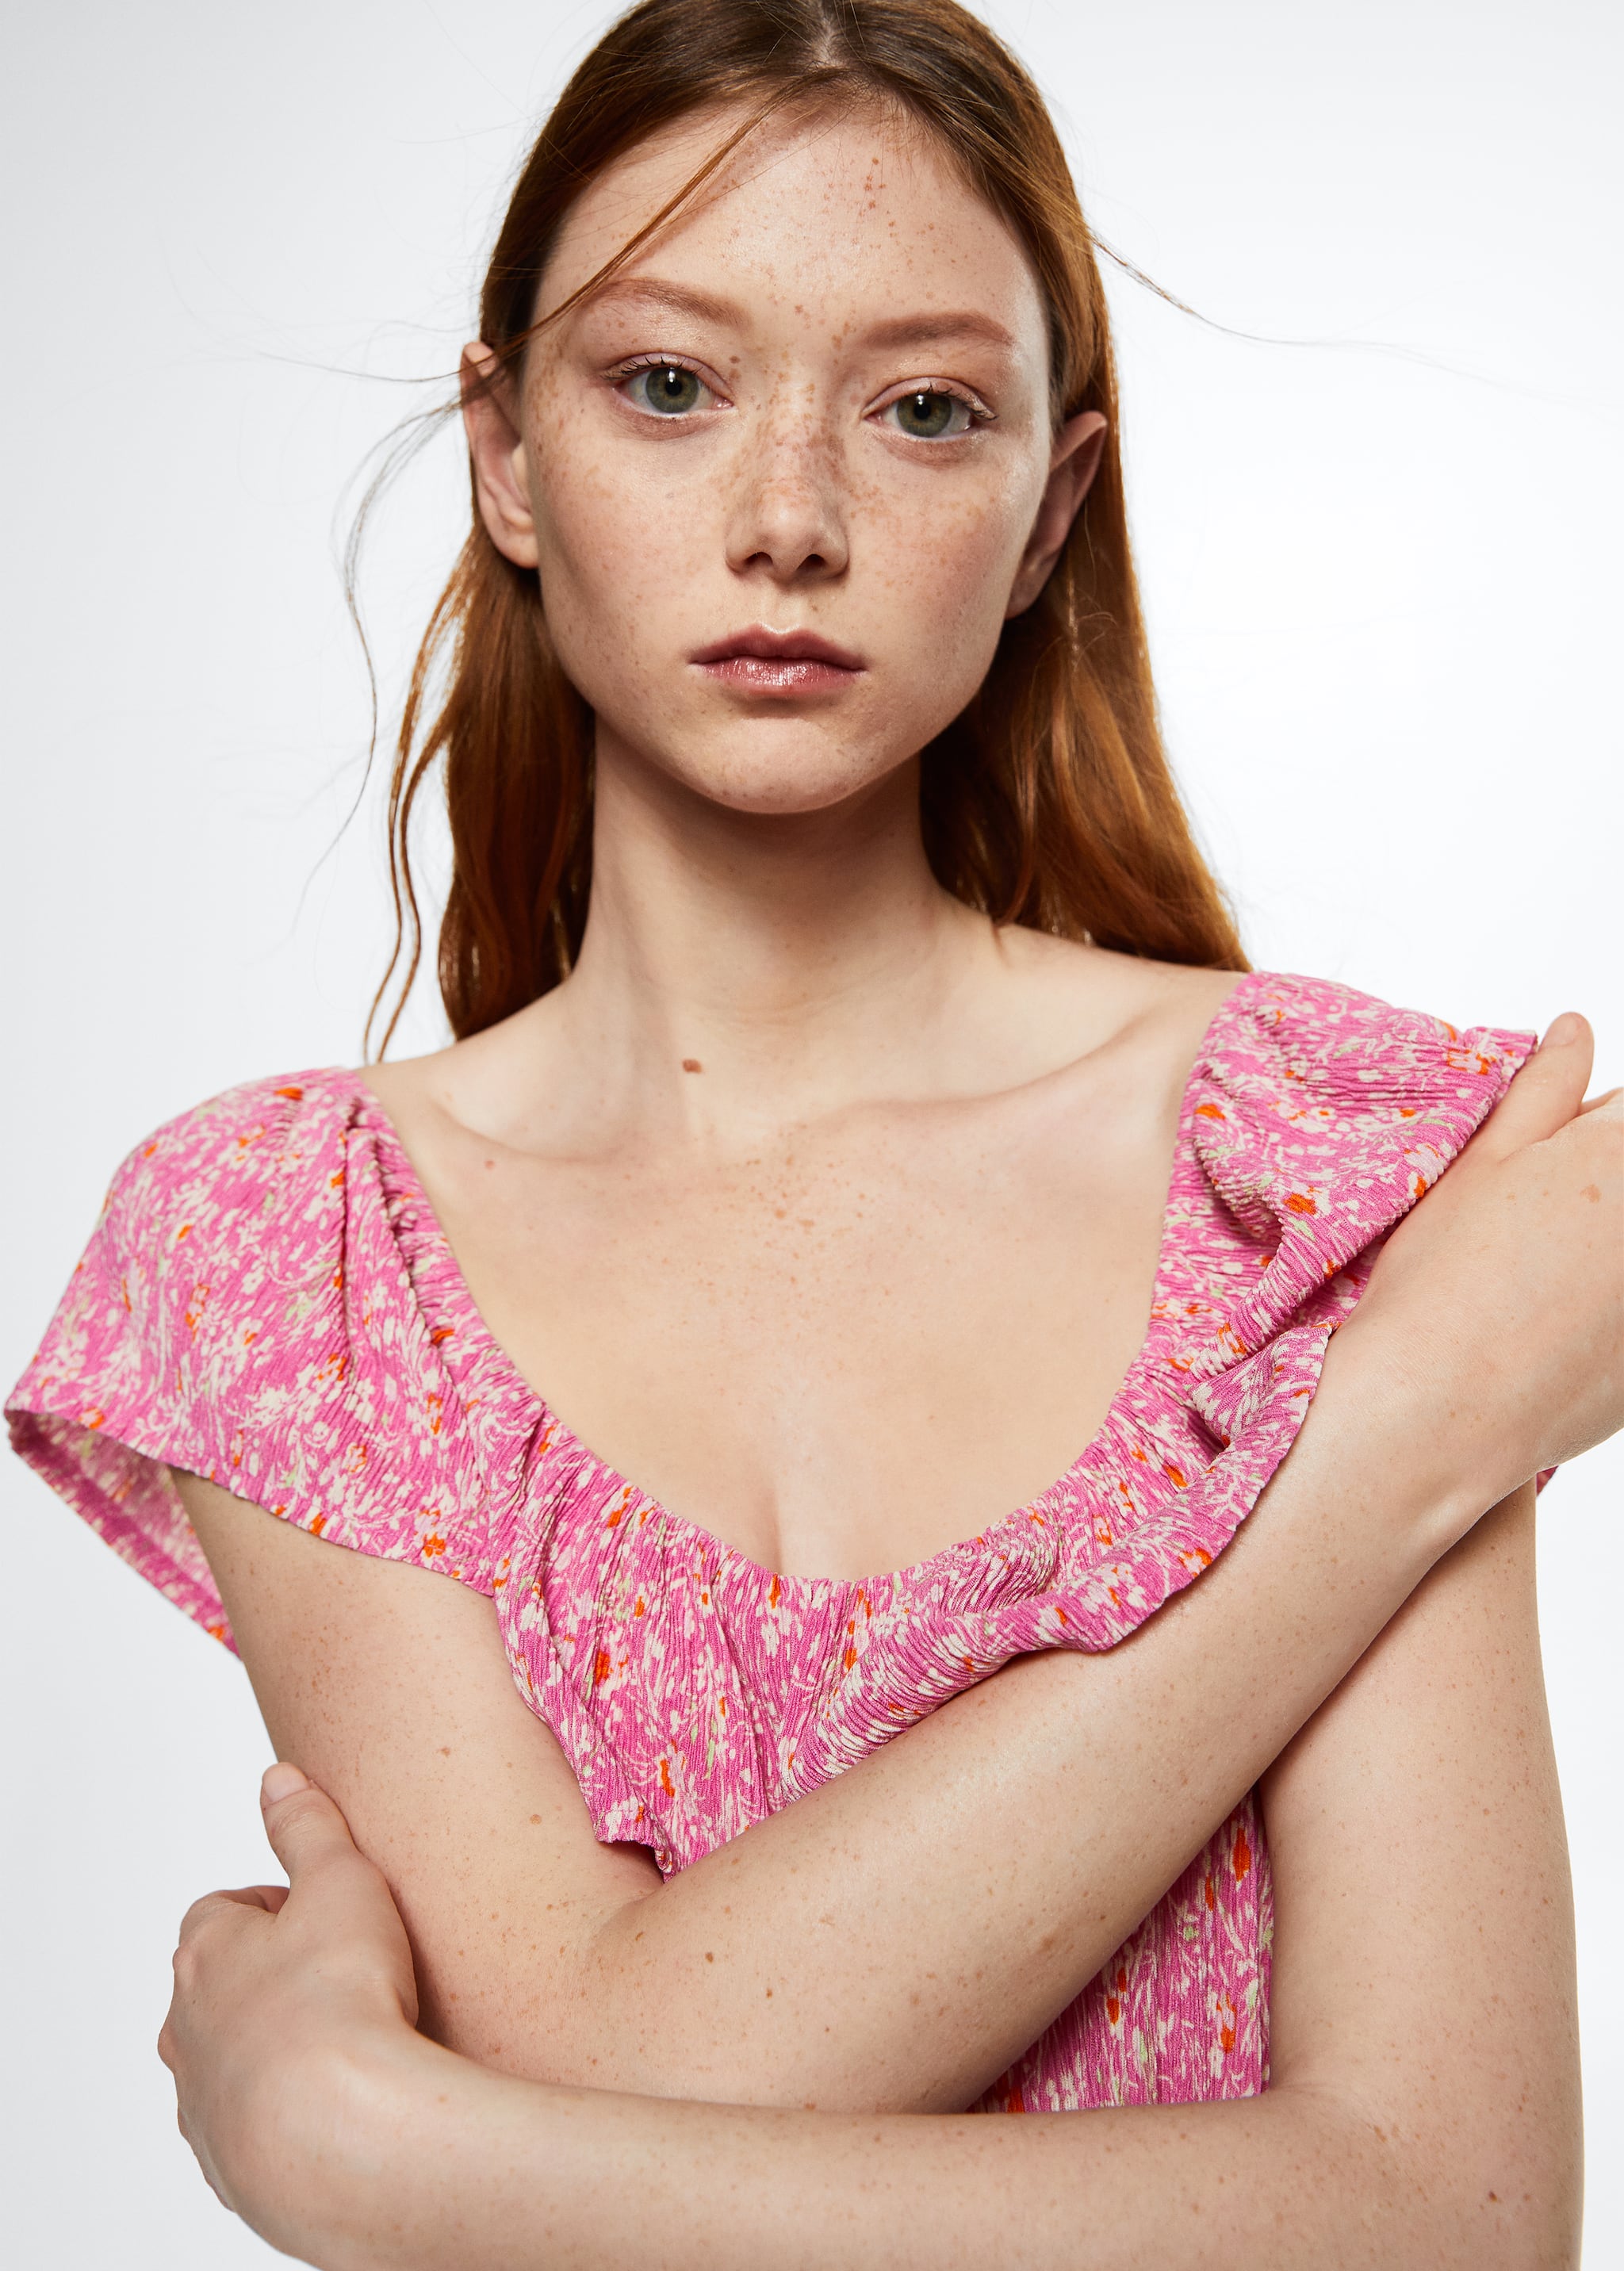 Floral print dress - Details of the article 1